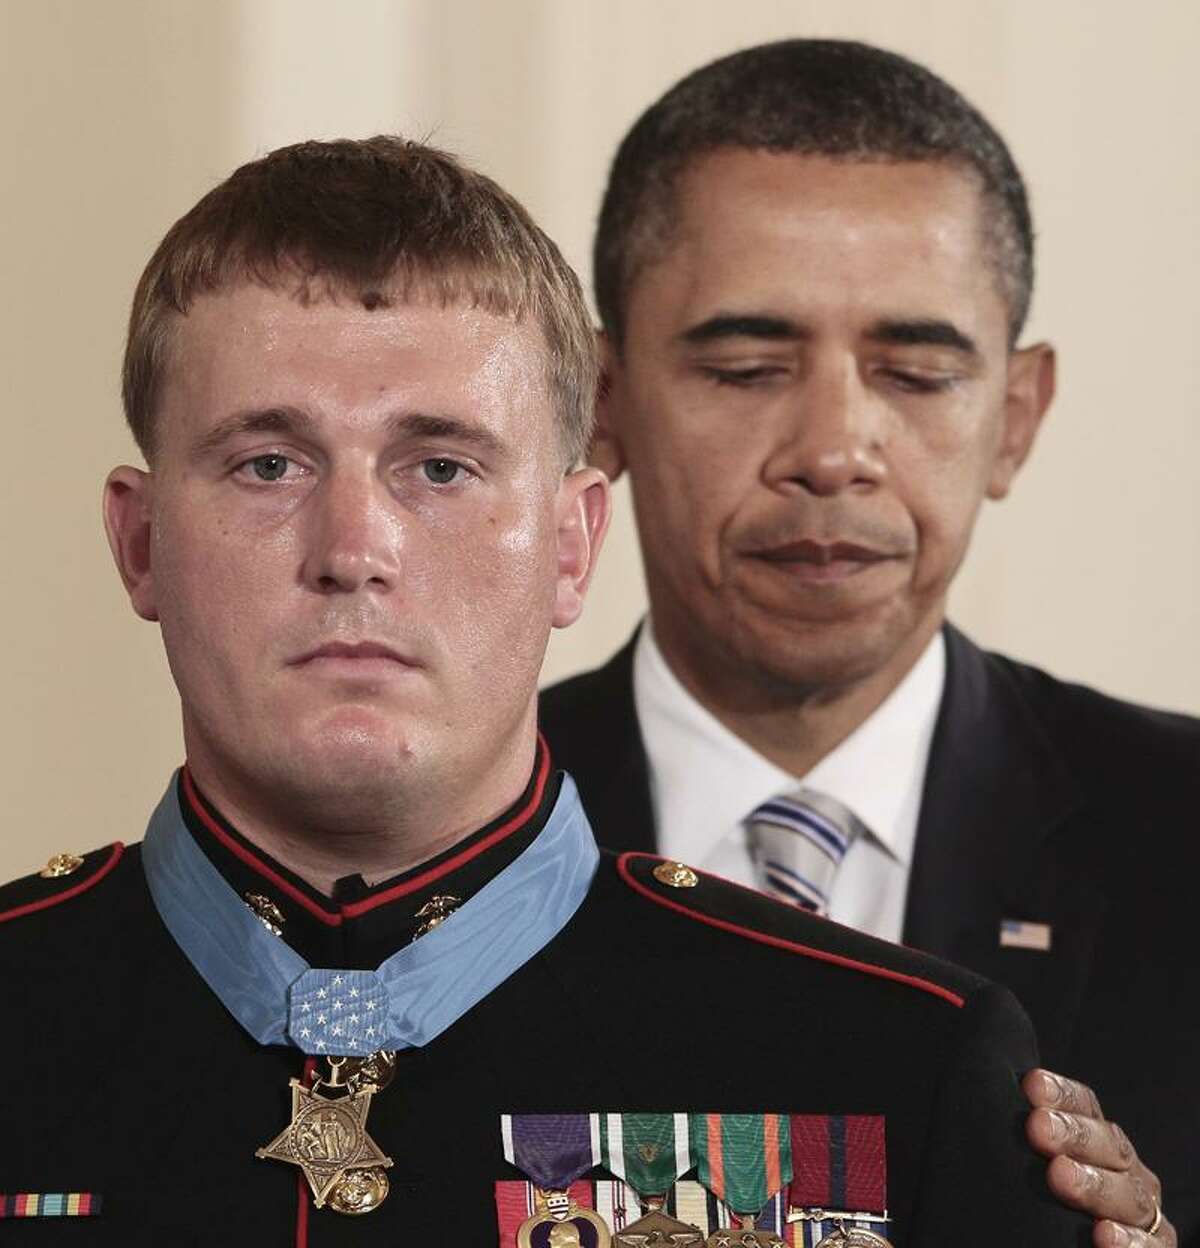 President Barack Obama awards the Medal of Honor to former Marine Cpl. Dakota Meyer, 23, from Greensburg, Ky., Thursday during a ceremony in the East Room of the White House in Washington, D.C. Meyer, now a sergeant, was in Afghanistan's Kunar province in Sept. 2009 when he repeatedly ran through enemy fire to recover the bodies of fellow American troops. He is the first living Marine to be awarded the Medal of Honor for actions in Iraq or Afghanistan. Associated Press